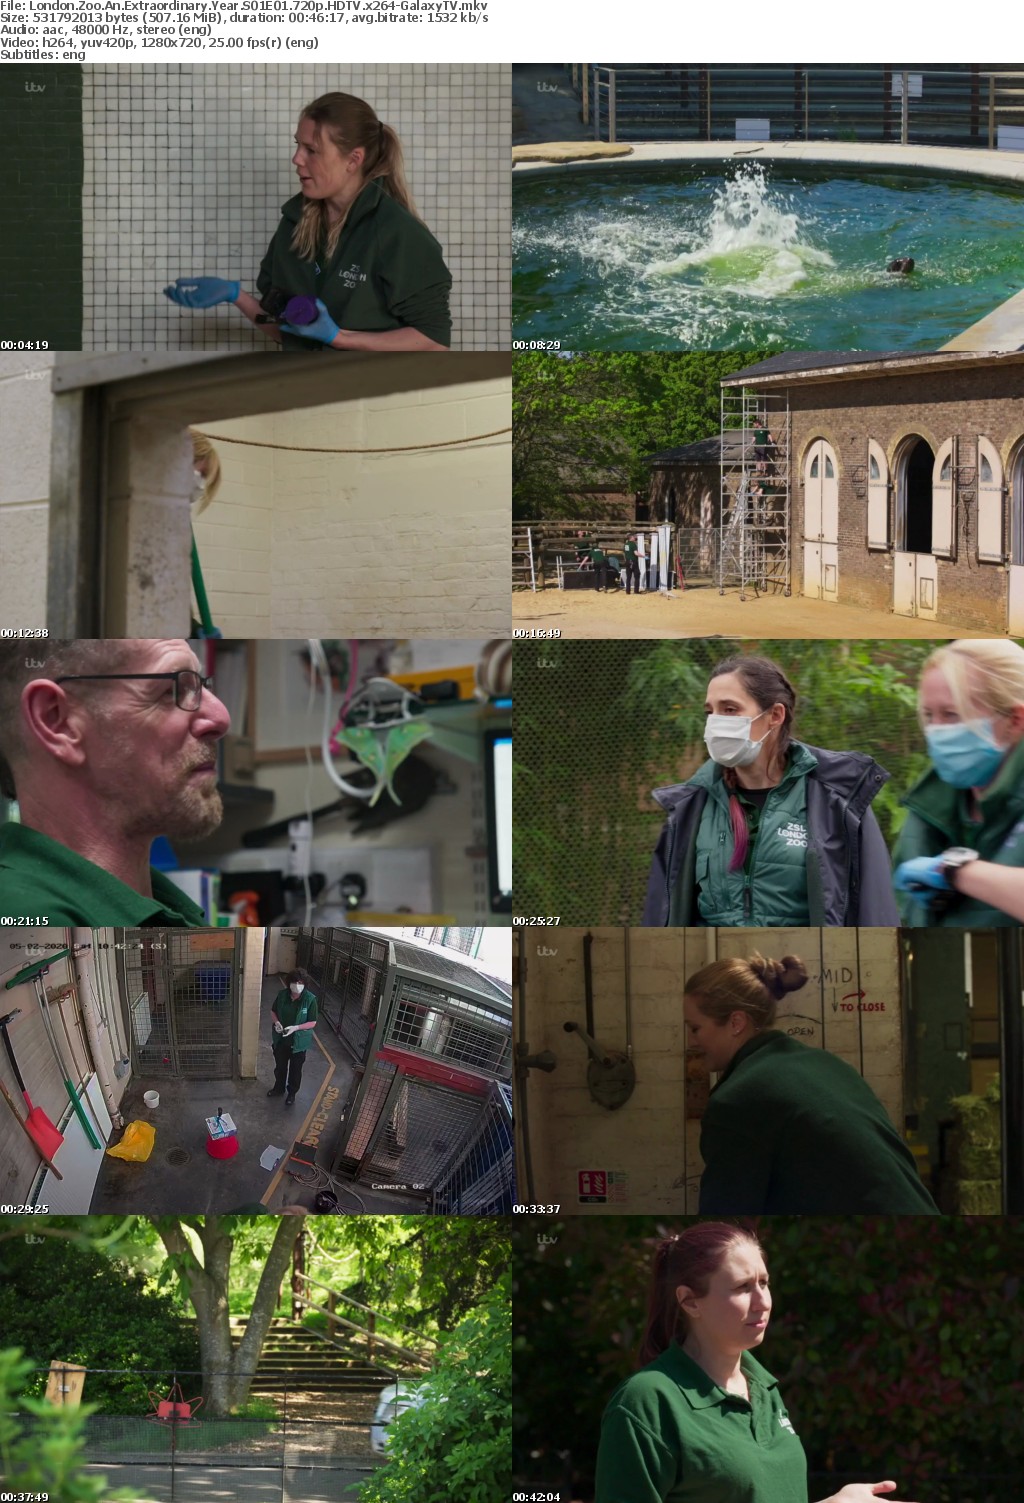 London Zoo An Extraordinary Year S01 COMPLETE 720p HDTV x264-GalaxyTV